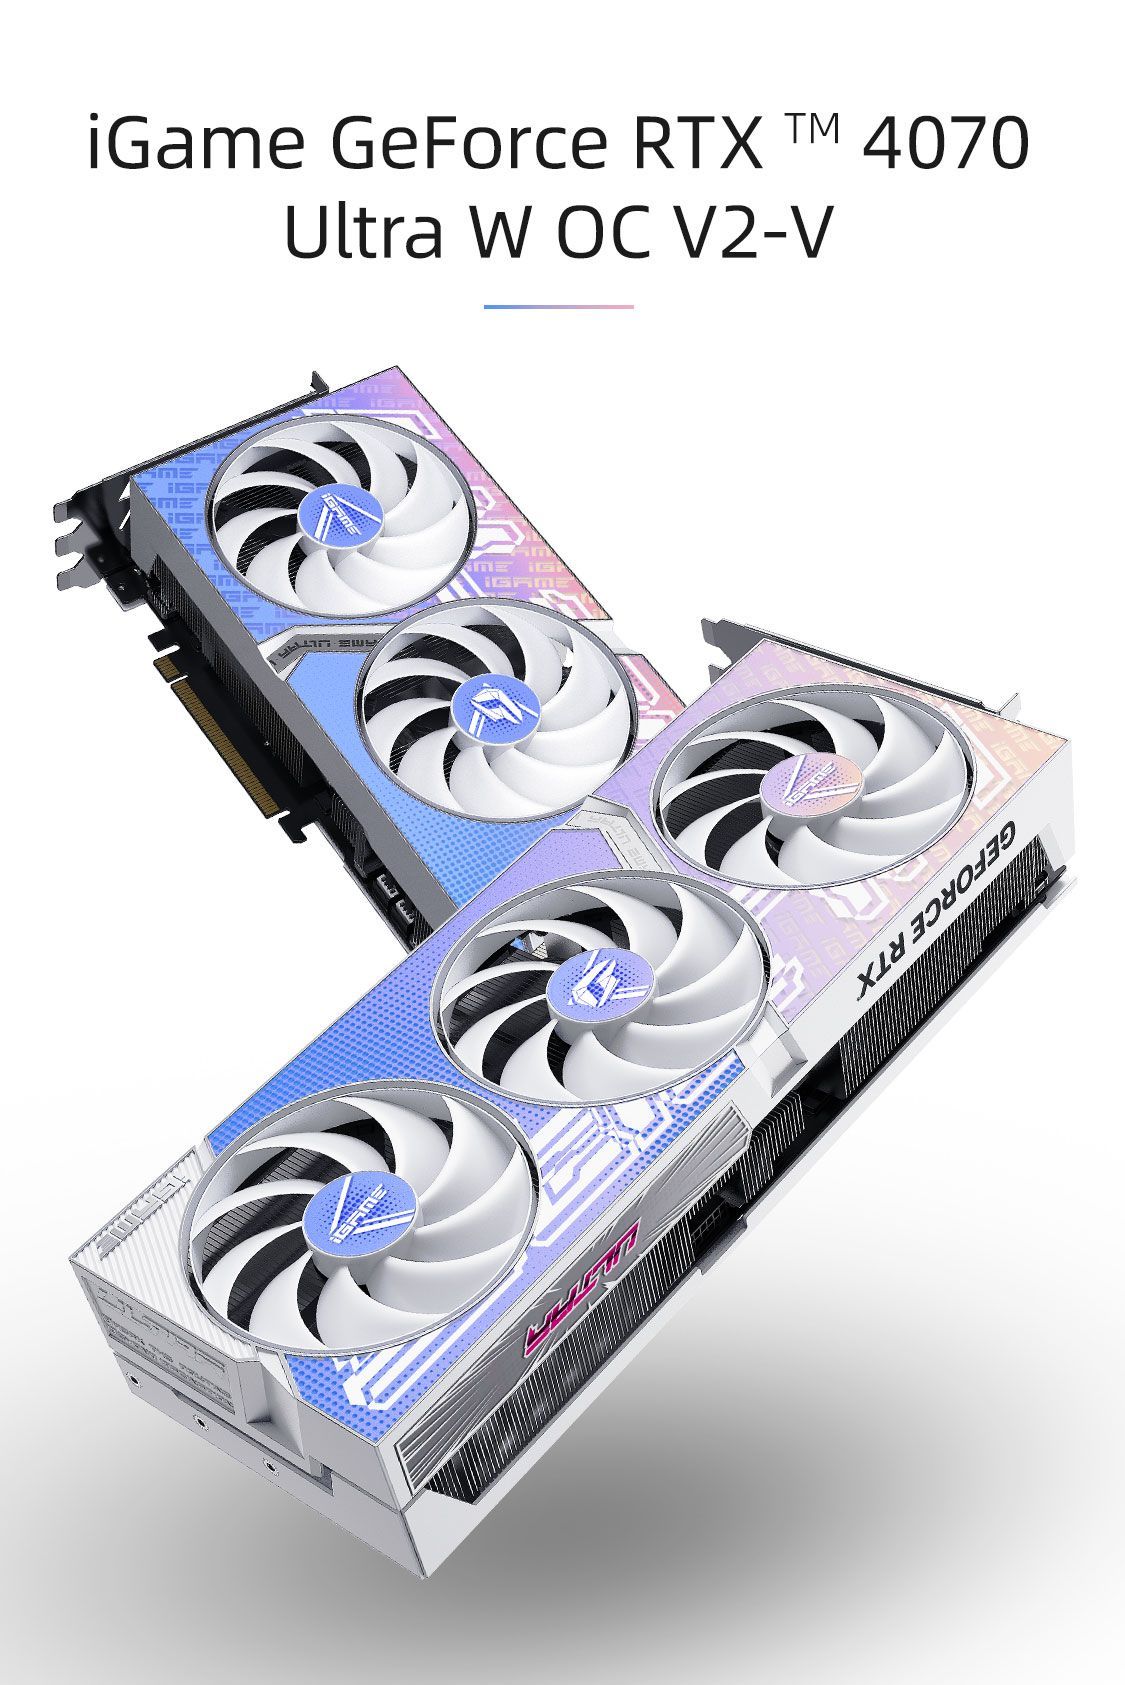 Colorful geforce rtx 4070 12 гб. IGAME GEFORCE RTX 4070 ti Ultra w OC-V. RTX 4080 colorful IGAME. Colorful IGAME GEFORCE RTX 4080 16gb Ultra w OC-V. RTX 4080 colorful Ultra.